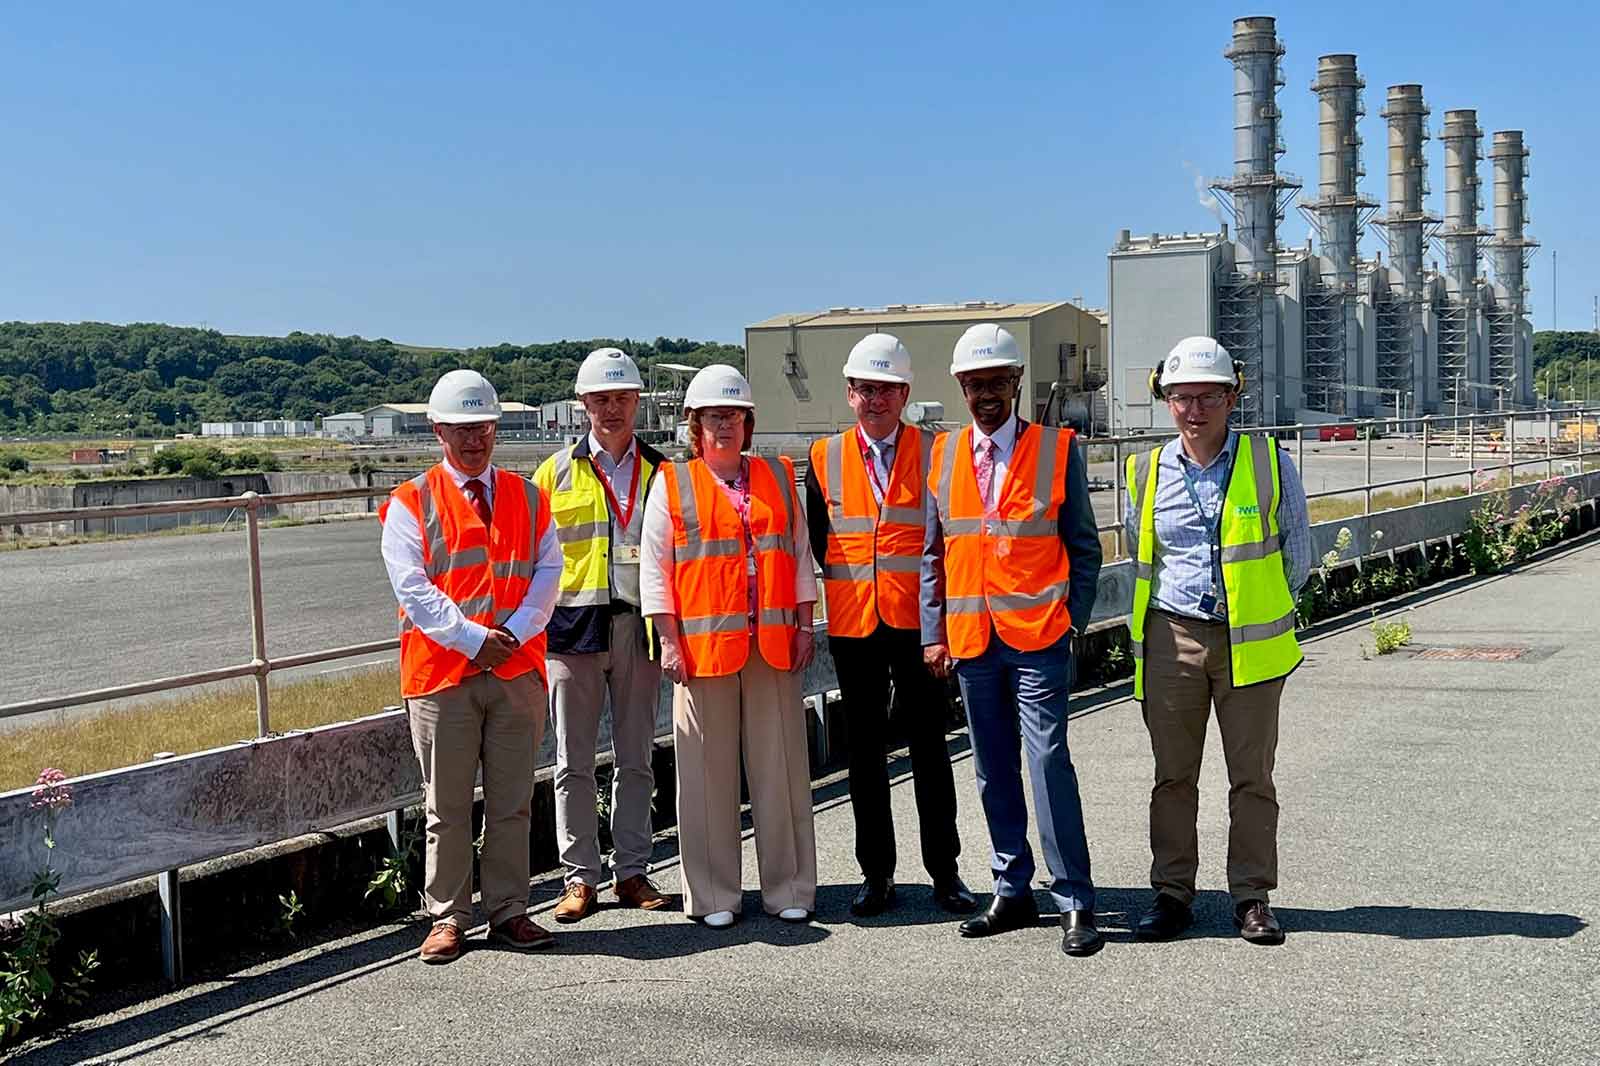 RWE welcomes Vaughan Gething MS to Pembroke site to discuss decarbonisation ambitions